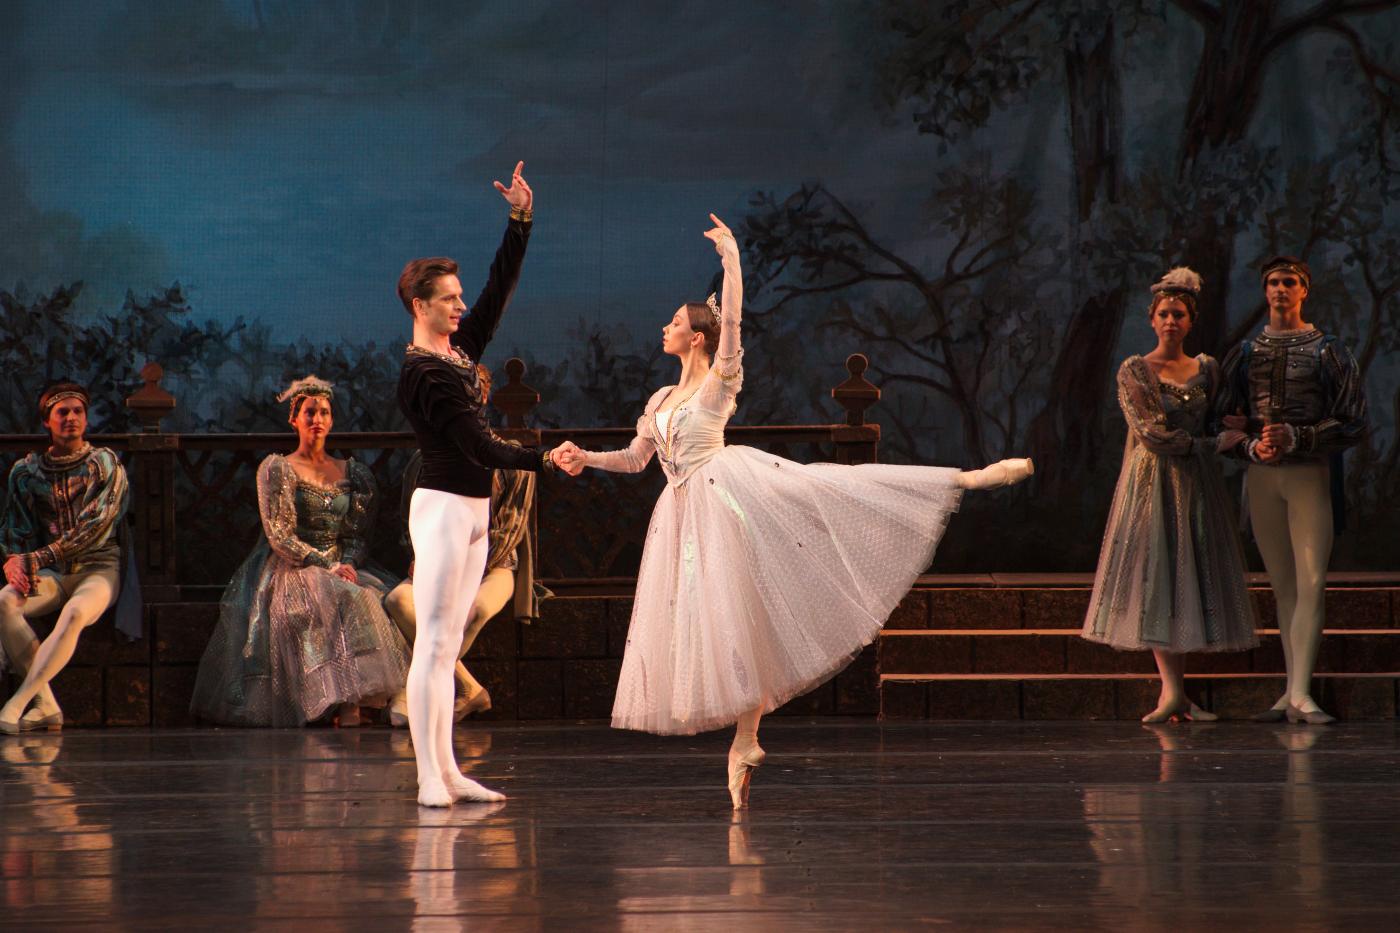 4. I.Mikhalev (Prince Siegfried), E.Solomyanko (Bride-to-be), and ensemble; “Swan Lake” by V.Burmeister and L.Ivanov, Ballet of the Stanislavsky and Nemirovich-Danchenko Moscow Music Theatre 2023 © Stanislavsky and Nemirovich-Danchenko Moscow Music Theatre 